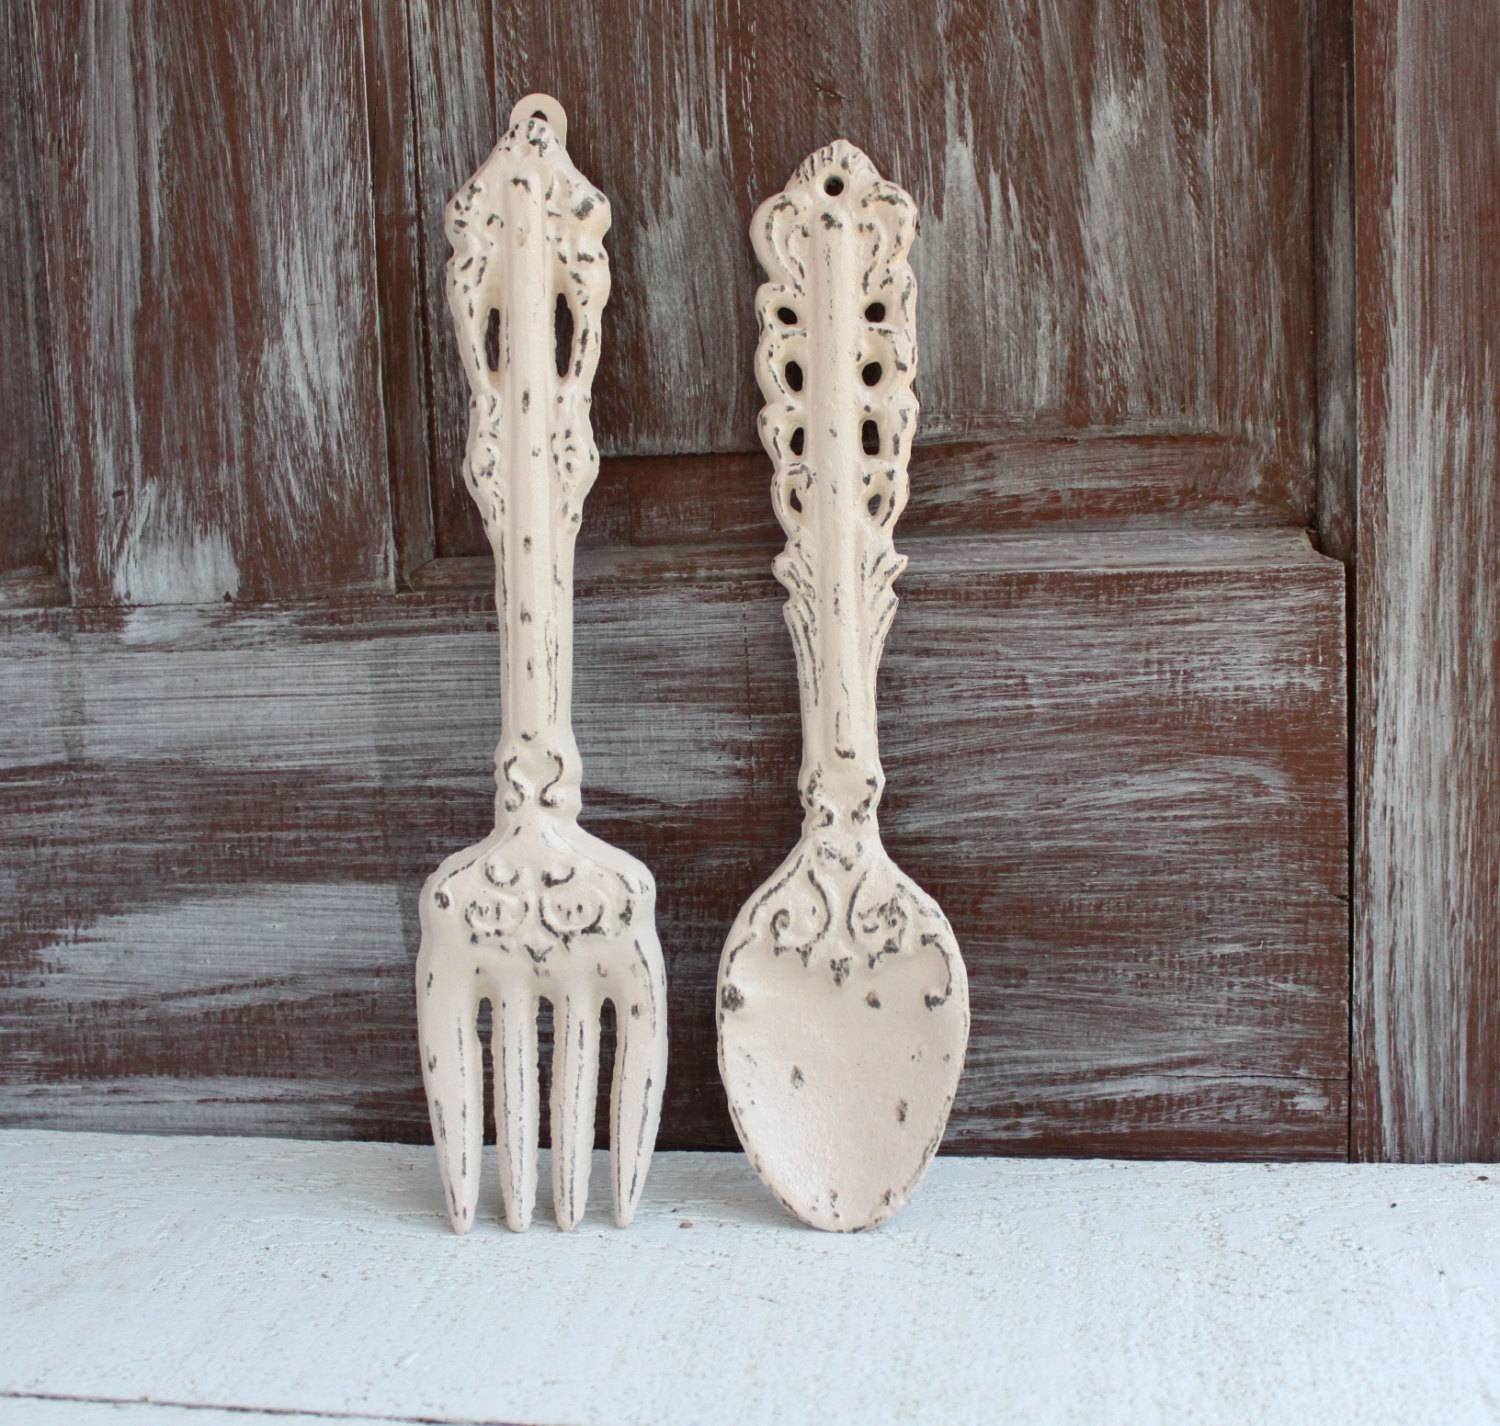 Large Ivory Fork And Spoon Kitchen Wall Decor Oversized Intended For 2017 Large Utensil Wall Art (View 11 of 20)